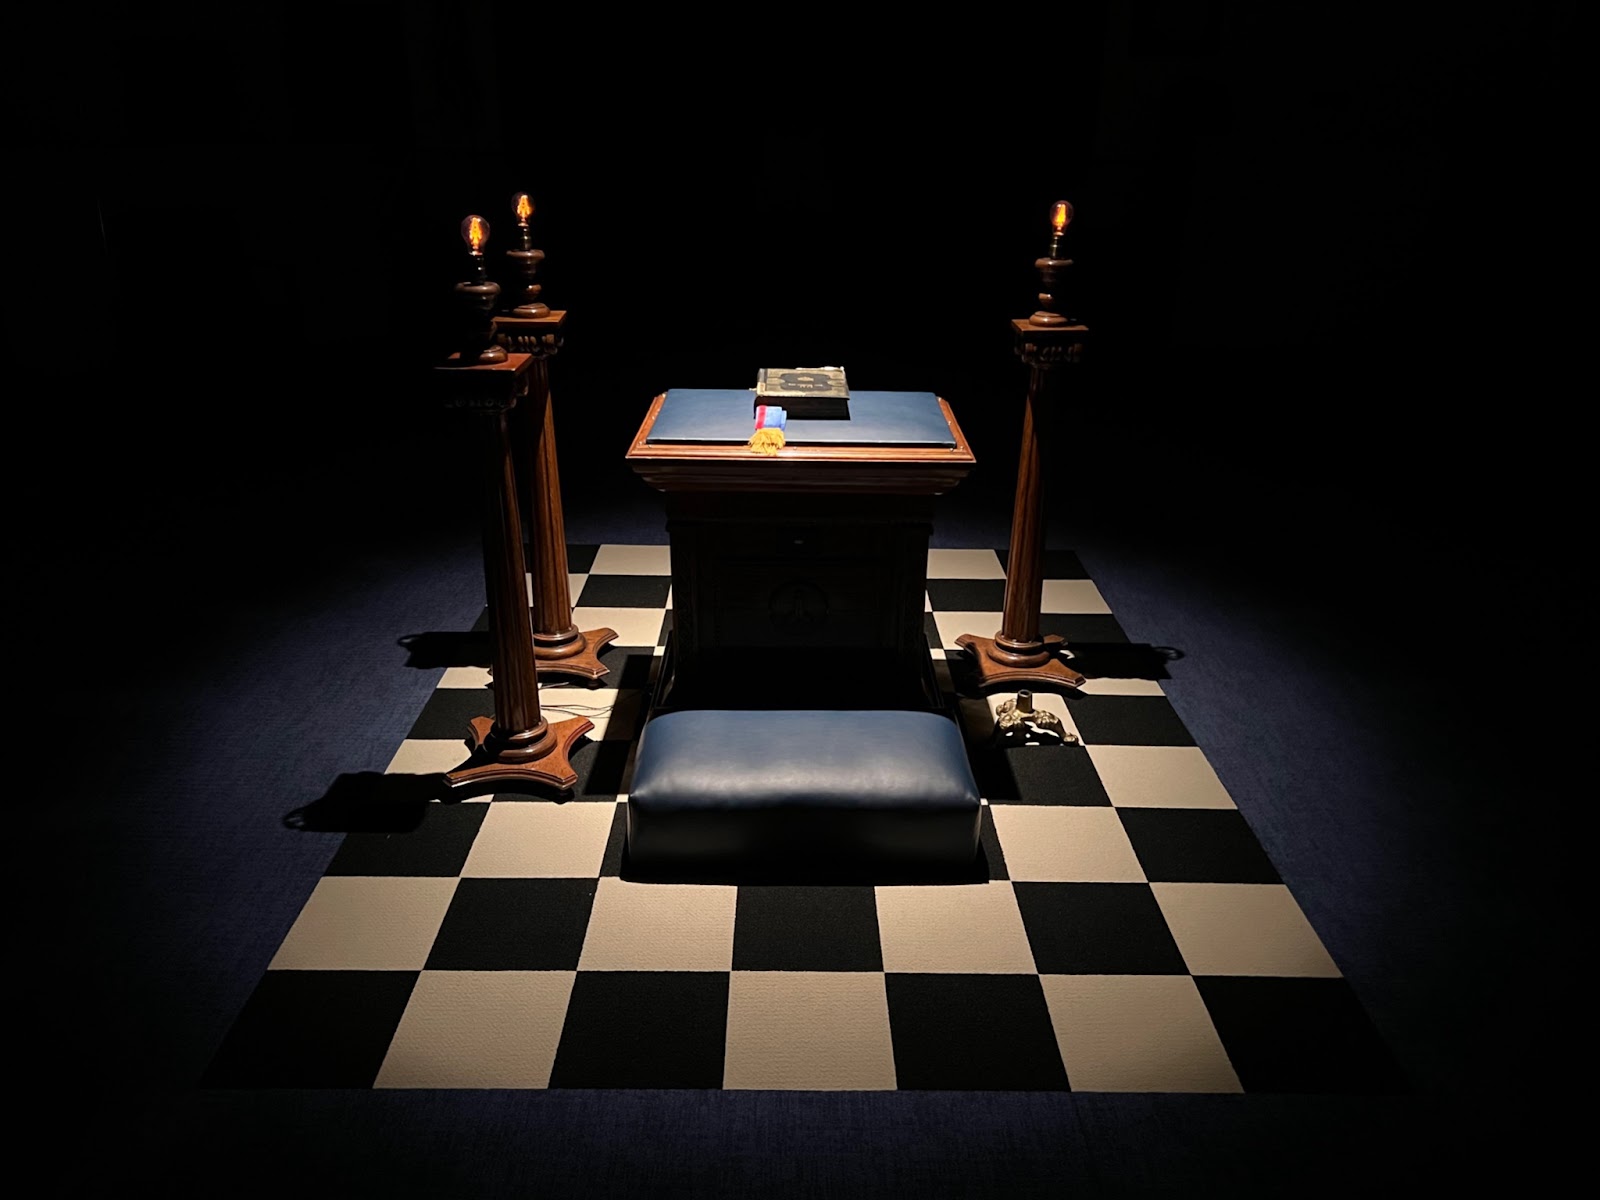 An image of a Masonic altar and historical books.